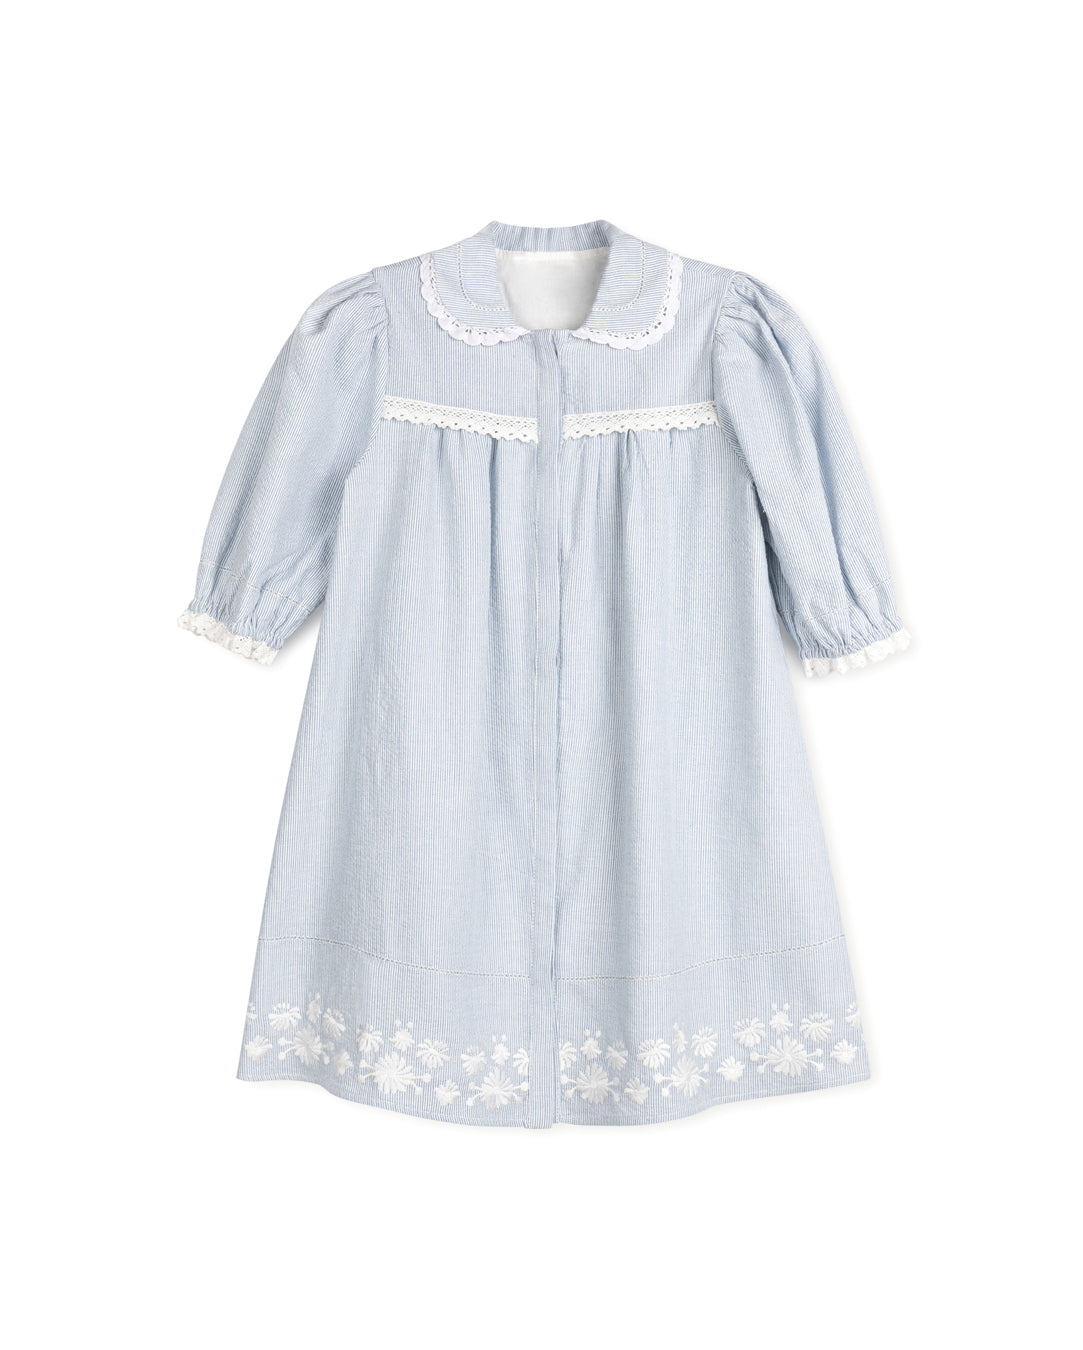 ONE CHILD BLUE STRIPED LACE TRIM EMBROIDERED DRESS